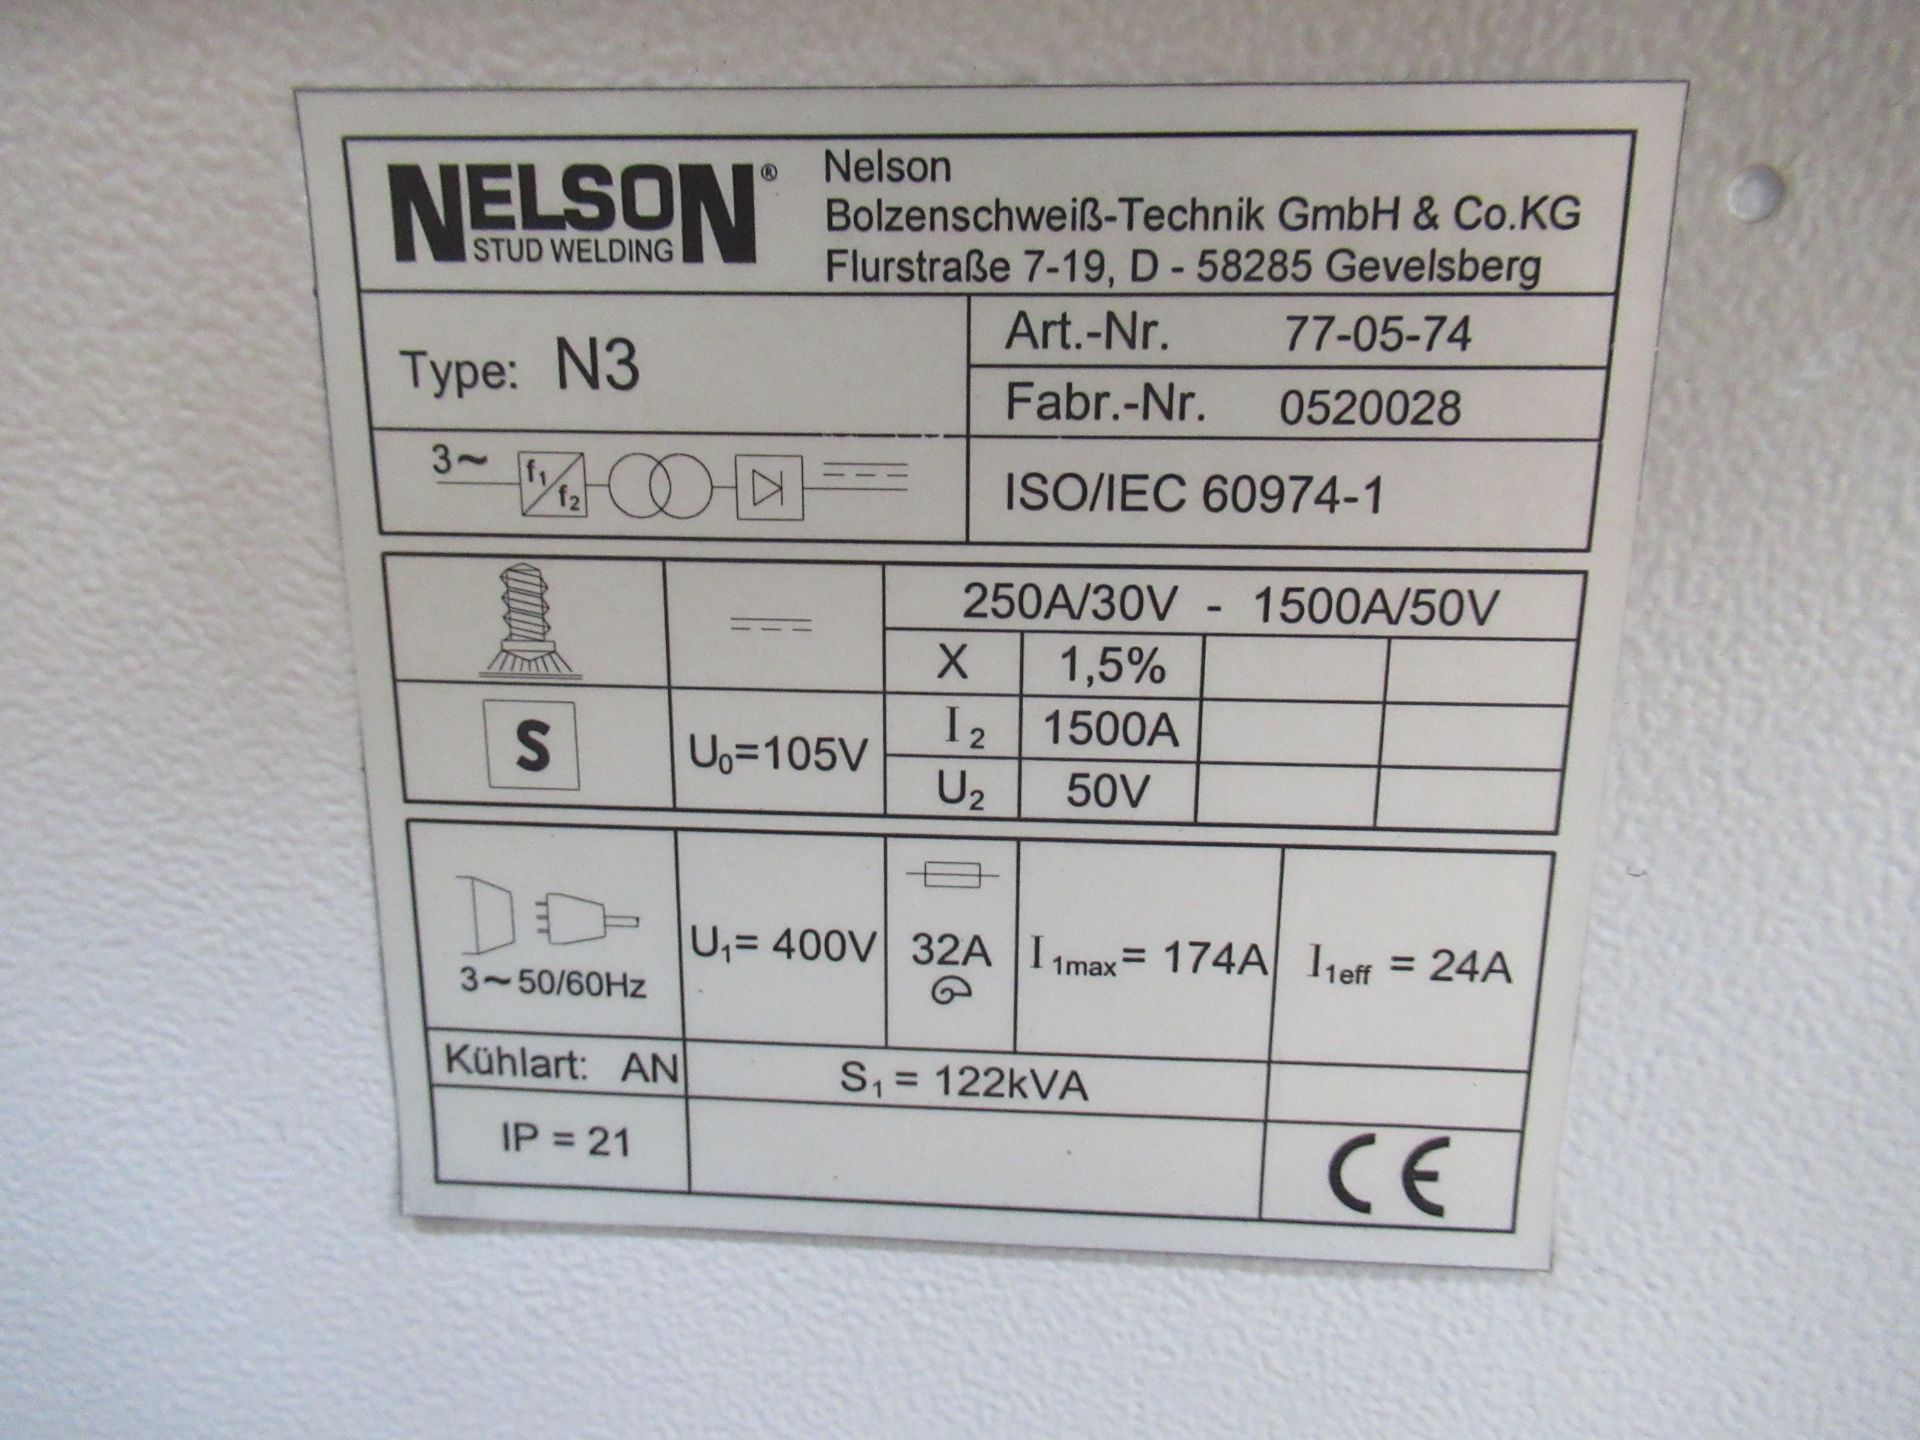 Nelson N3 inverter DSP technology stud welder with Nelson FSE100 CND Nelson remote control stud weld - Image 11 of 11